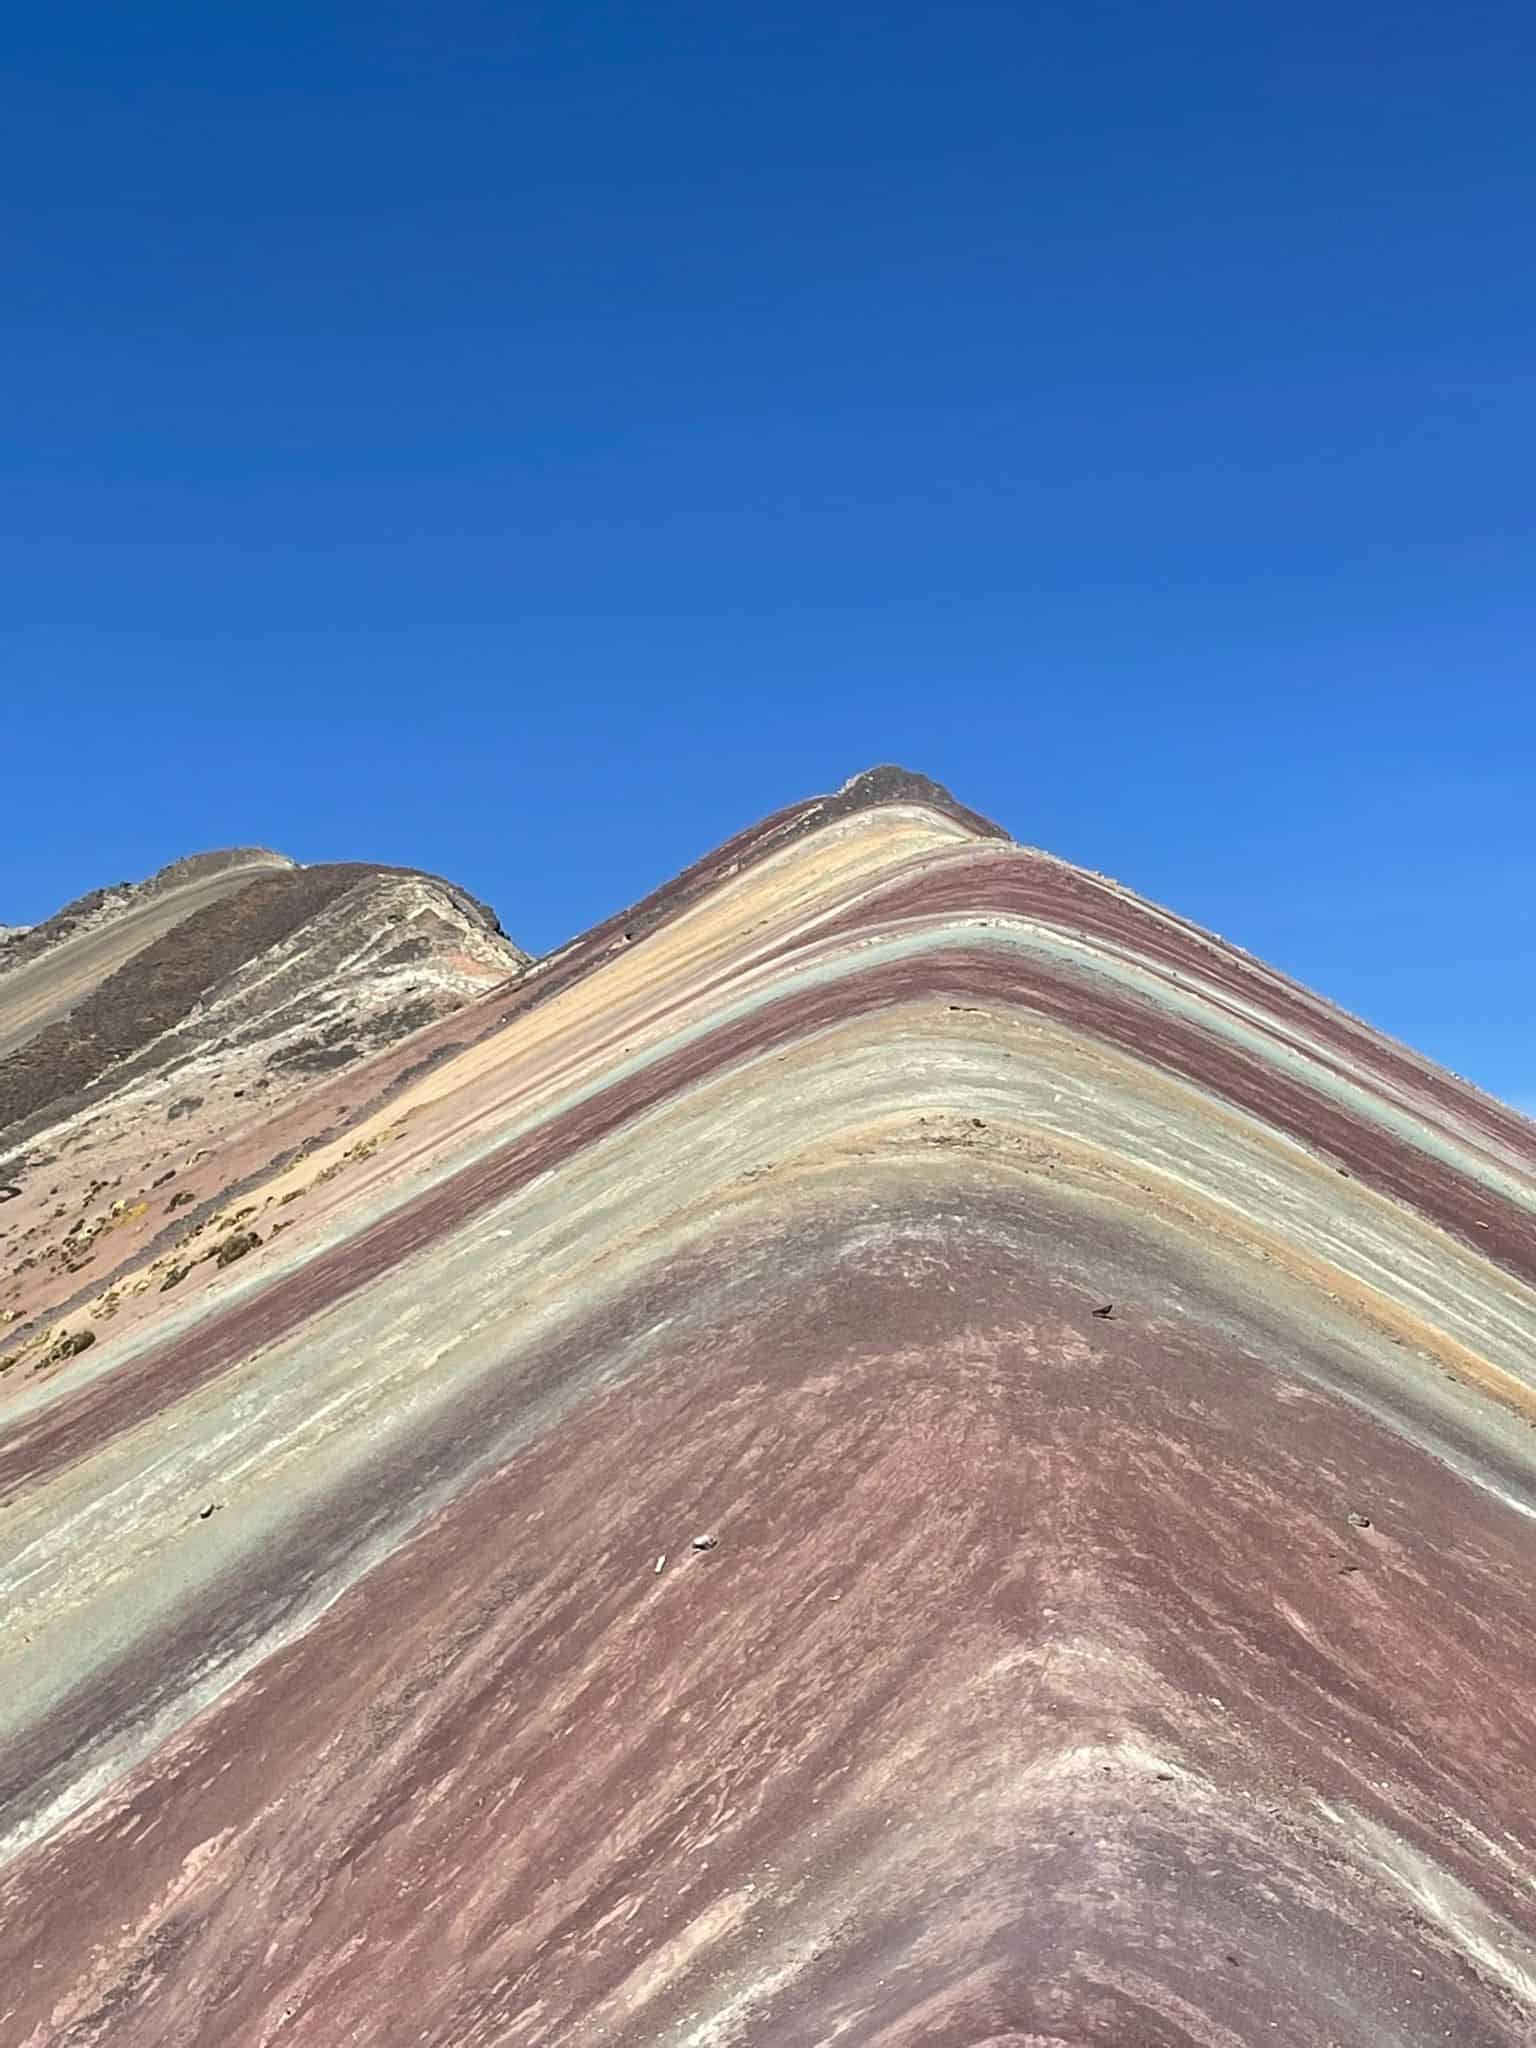 Mount Vinicunca (Rainbow Mountain) in Peru on a clear day